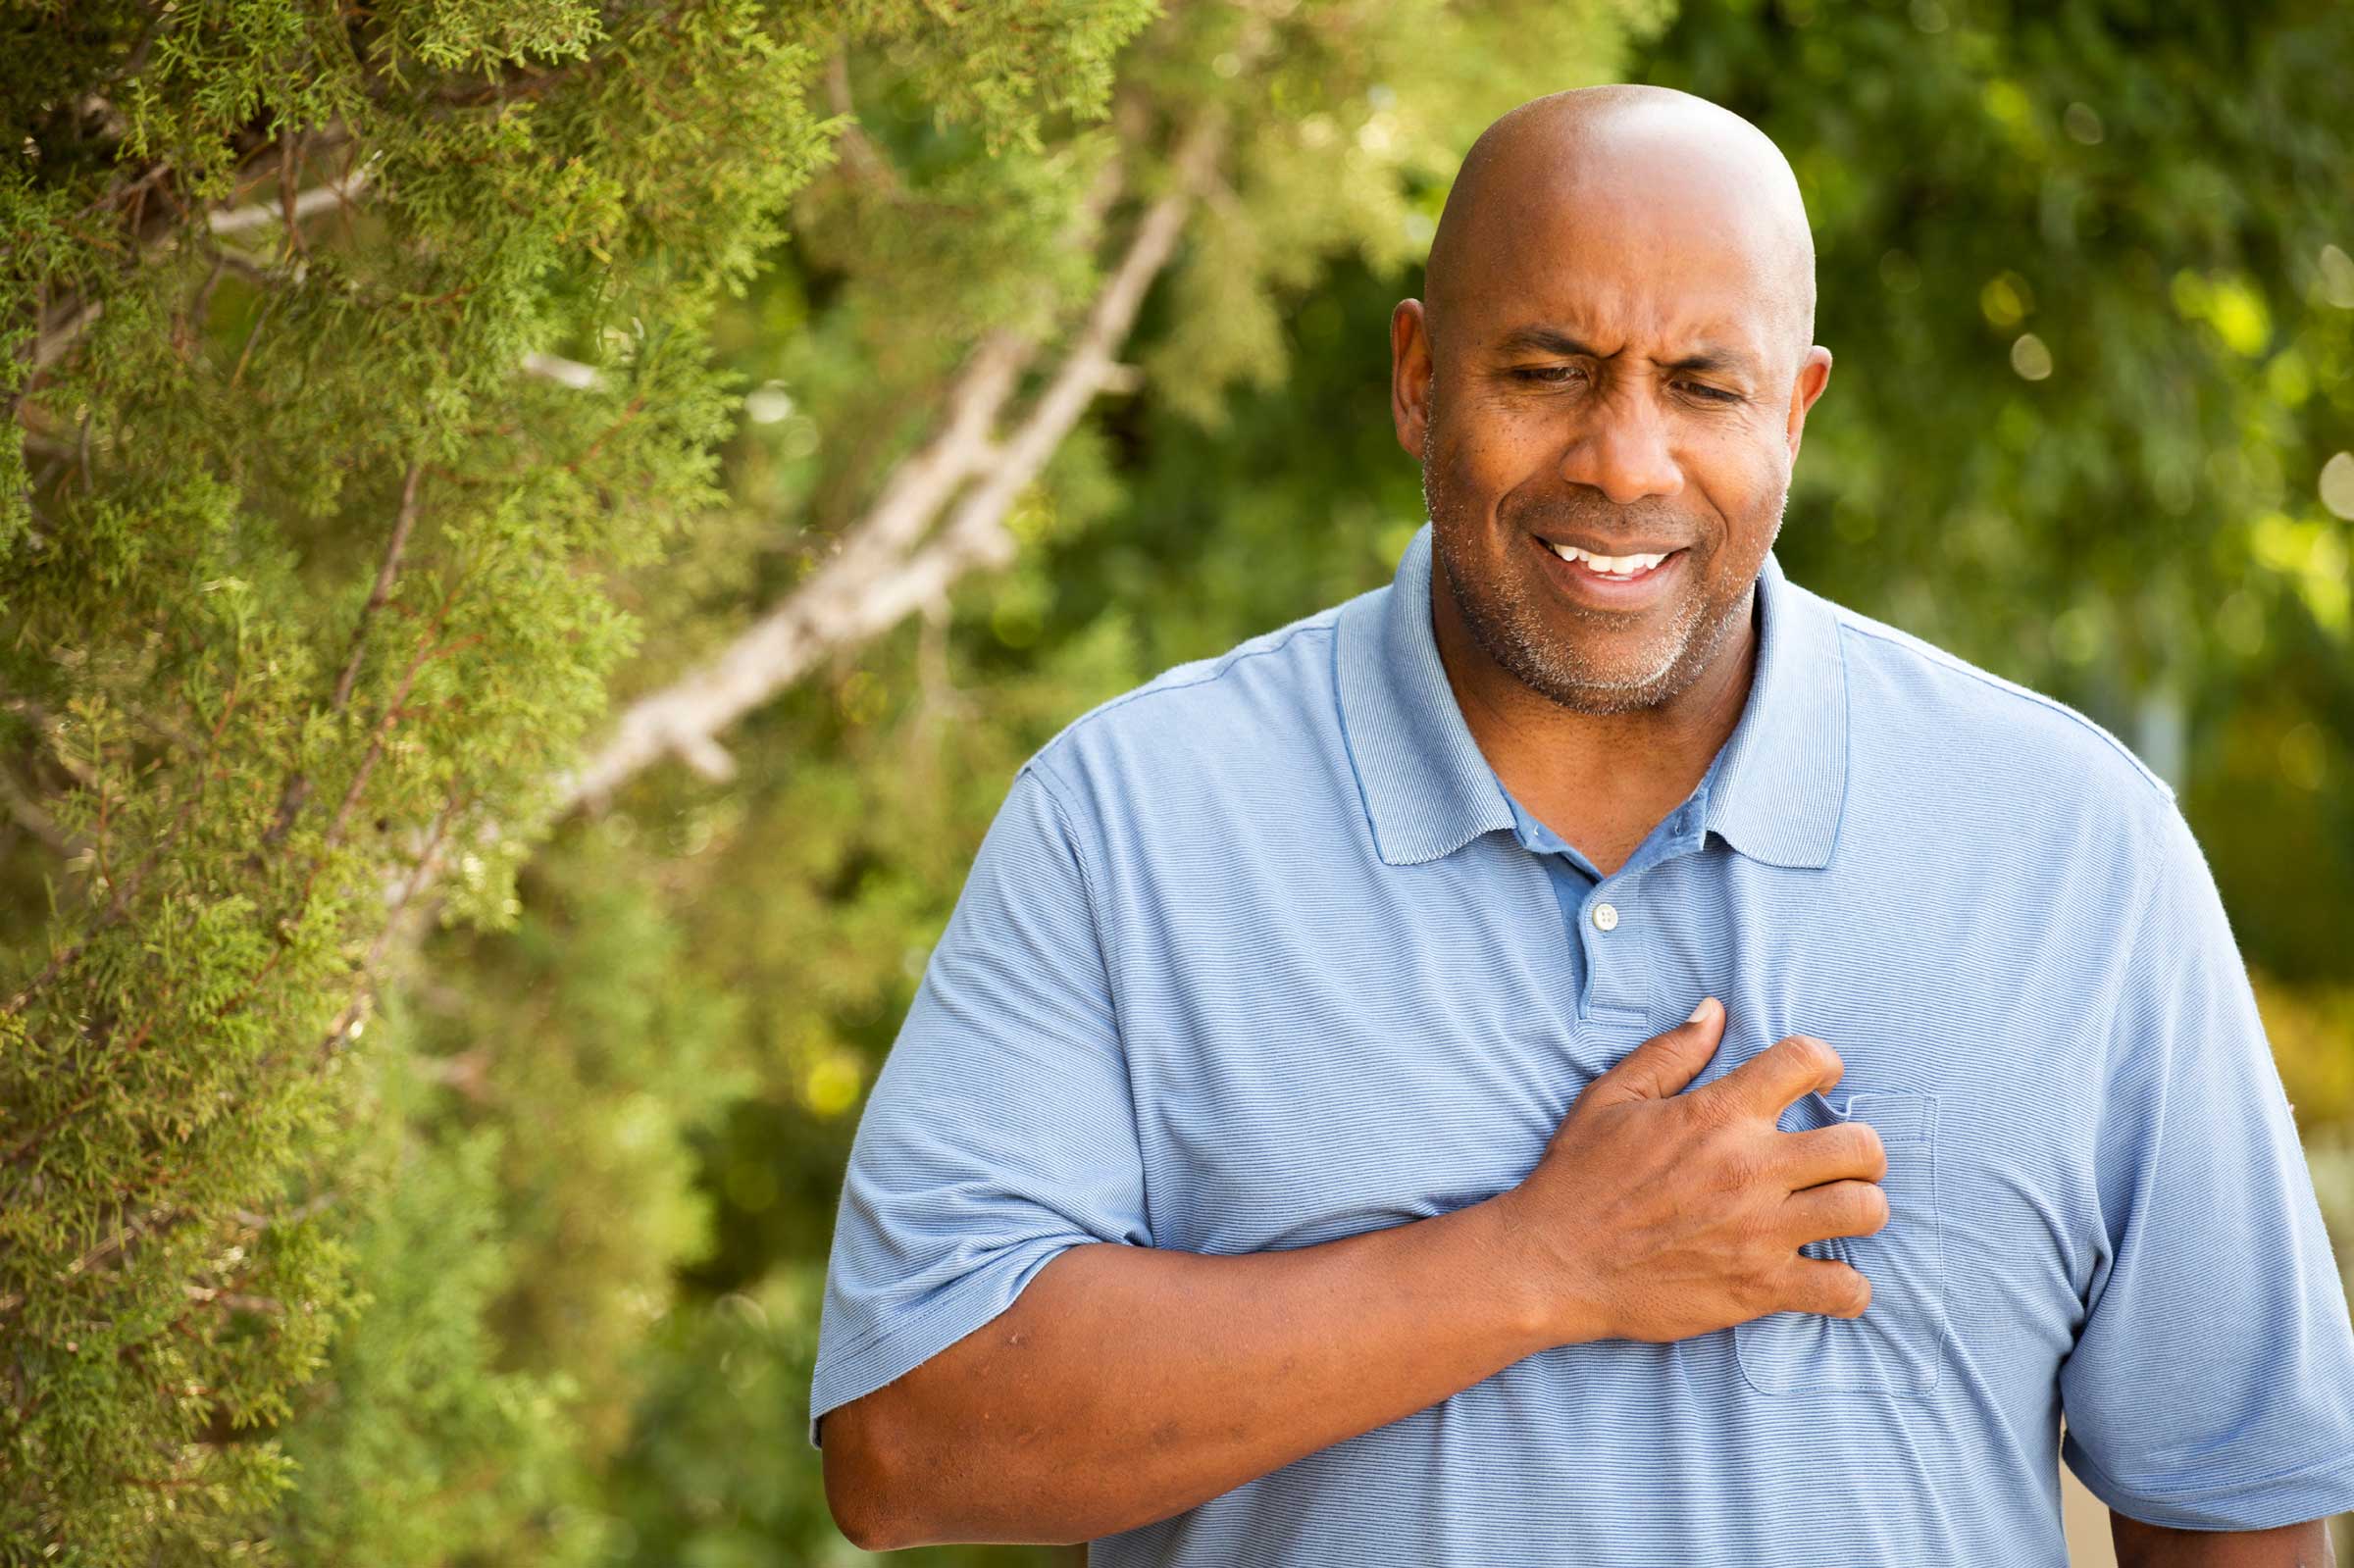 6 I can’t exercise while suffering from a heart disease.